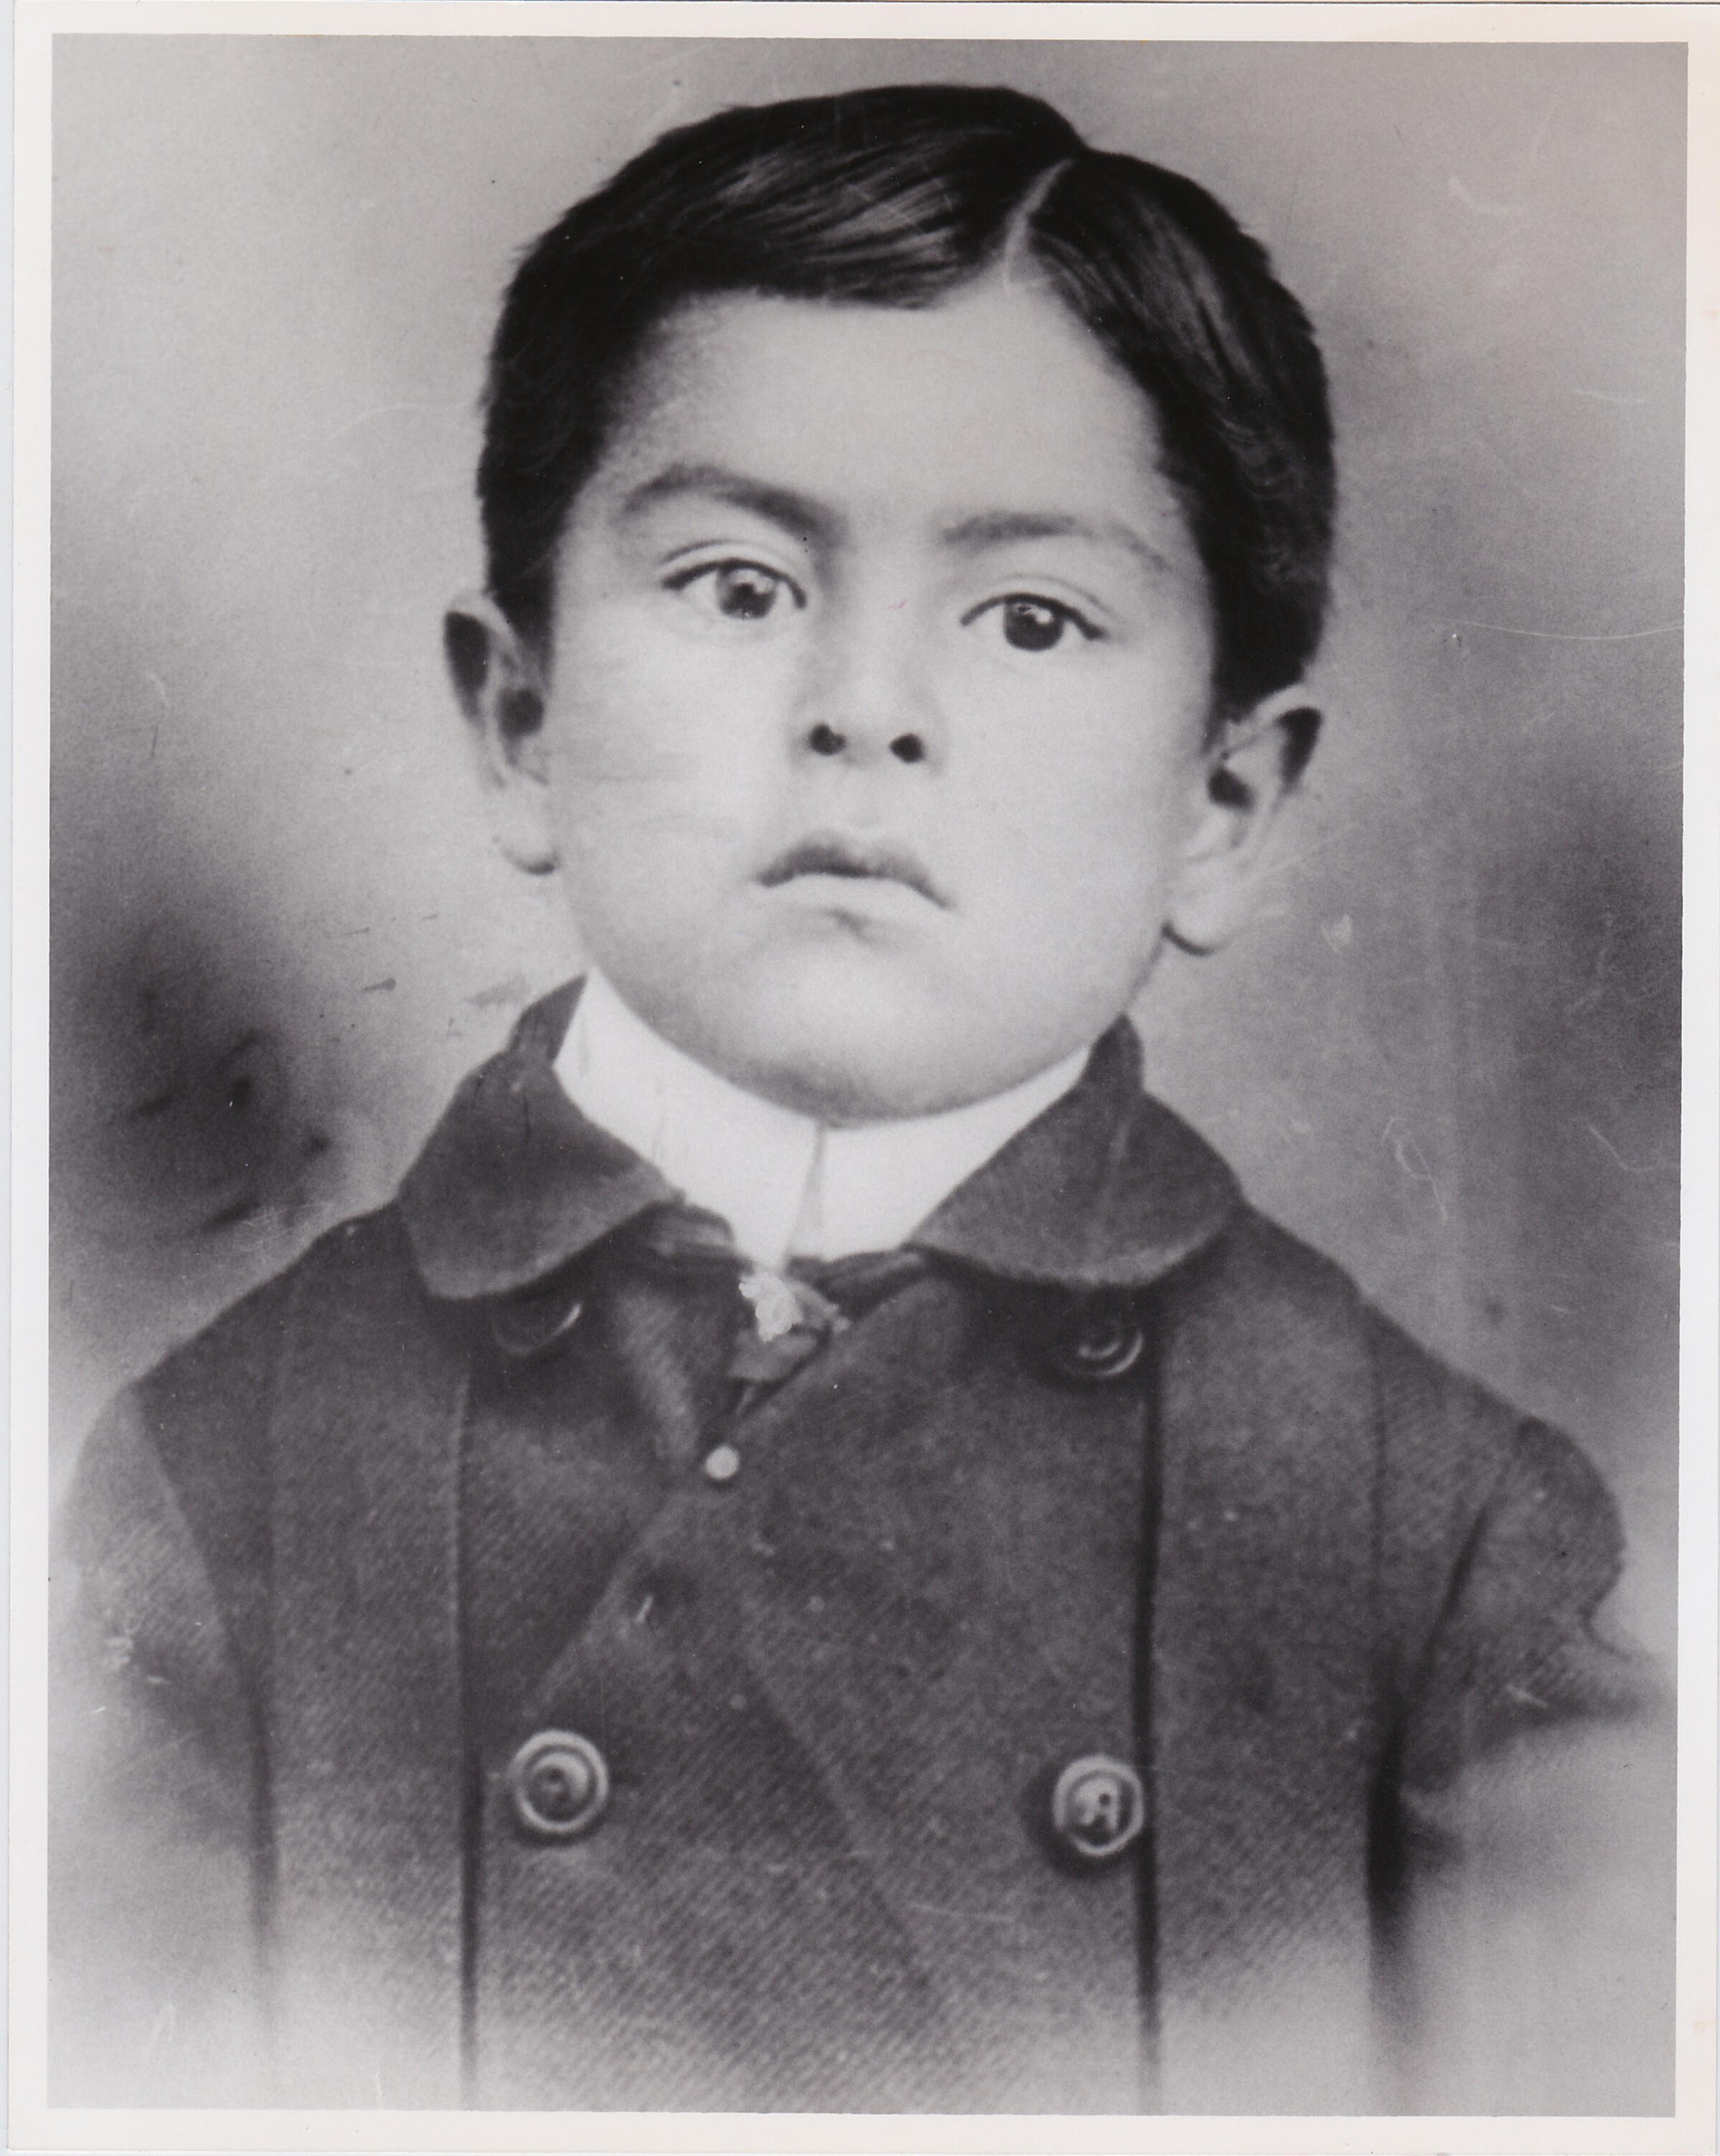 A photo of Miguel Maestas in his youth.